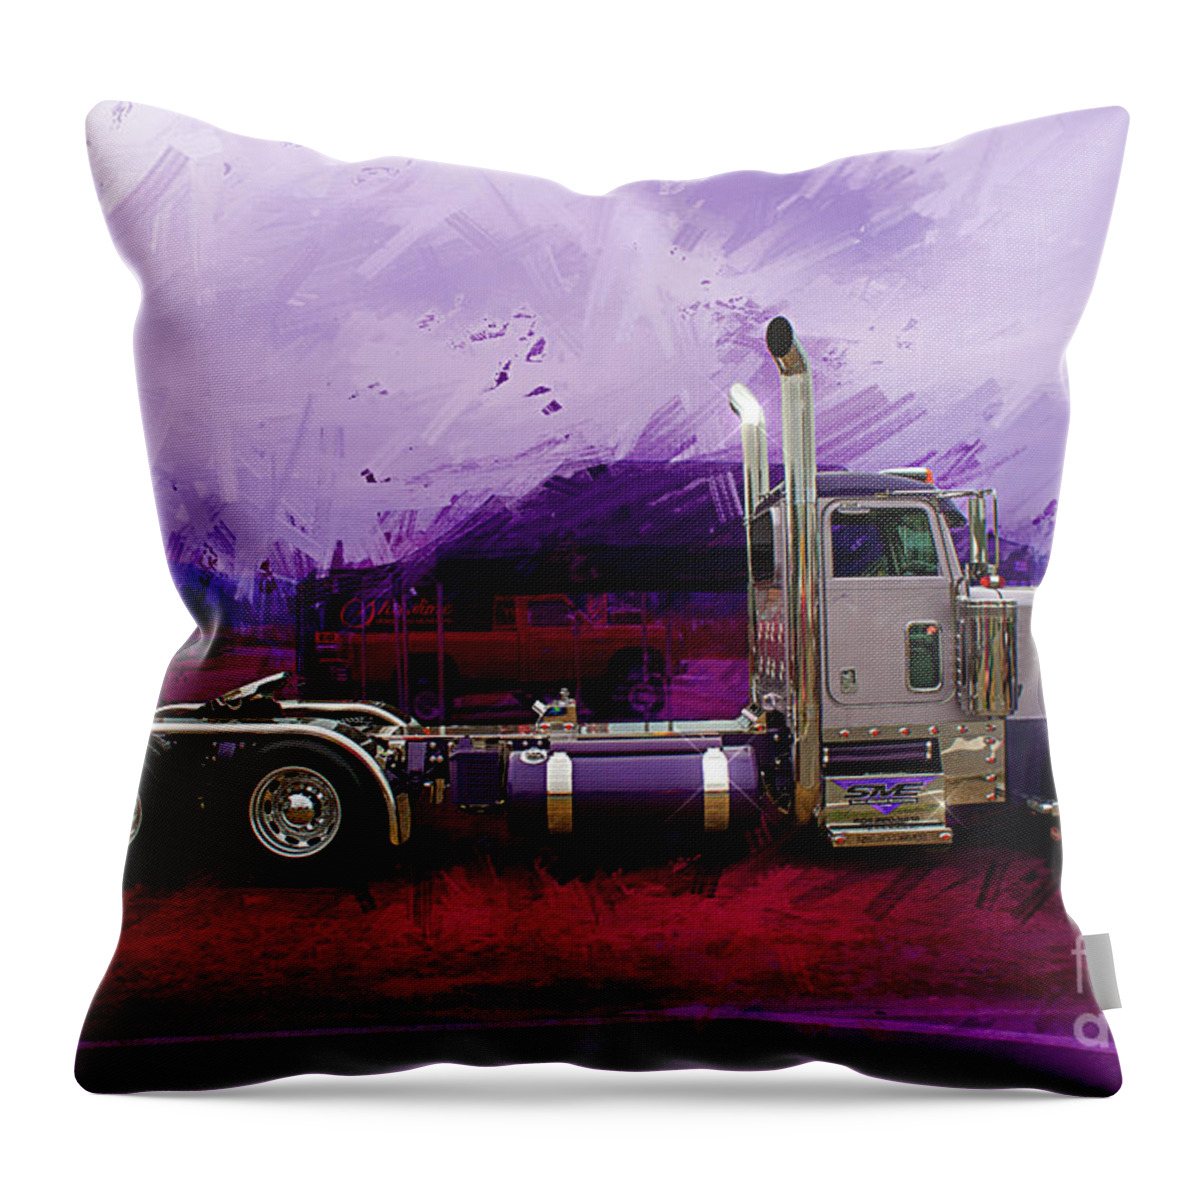 Big Rigs Throw Pillow featuring the photograph Catr9301-19 by Randy Harris